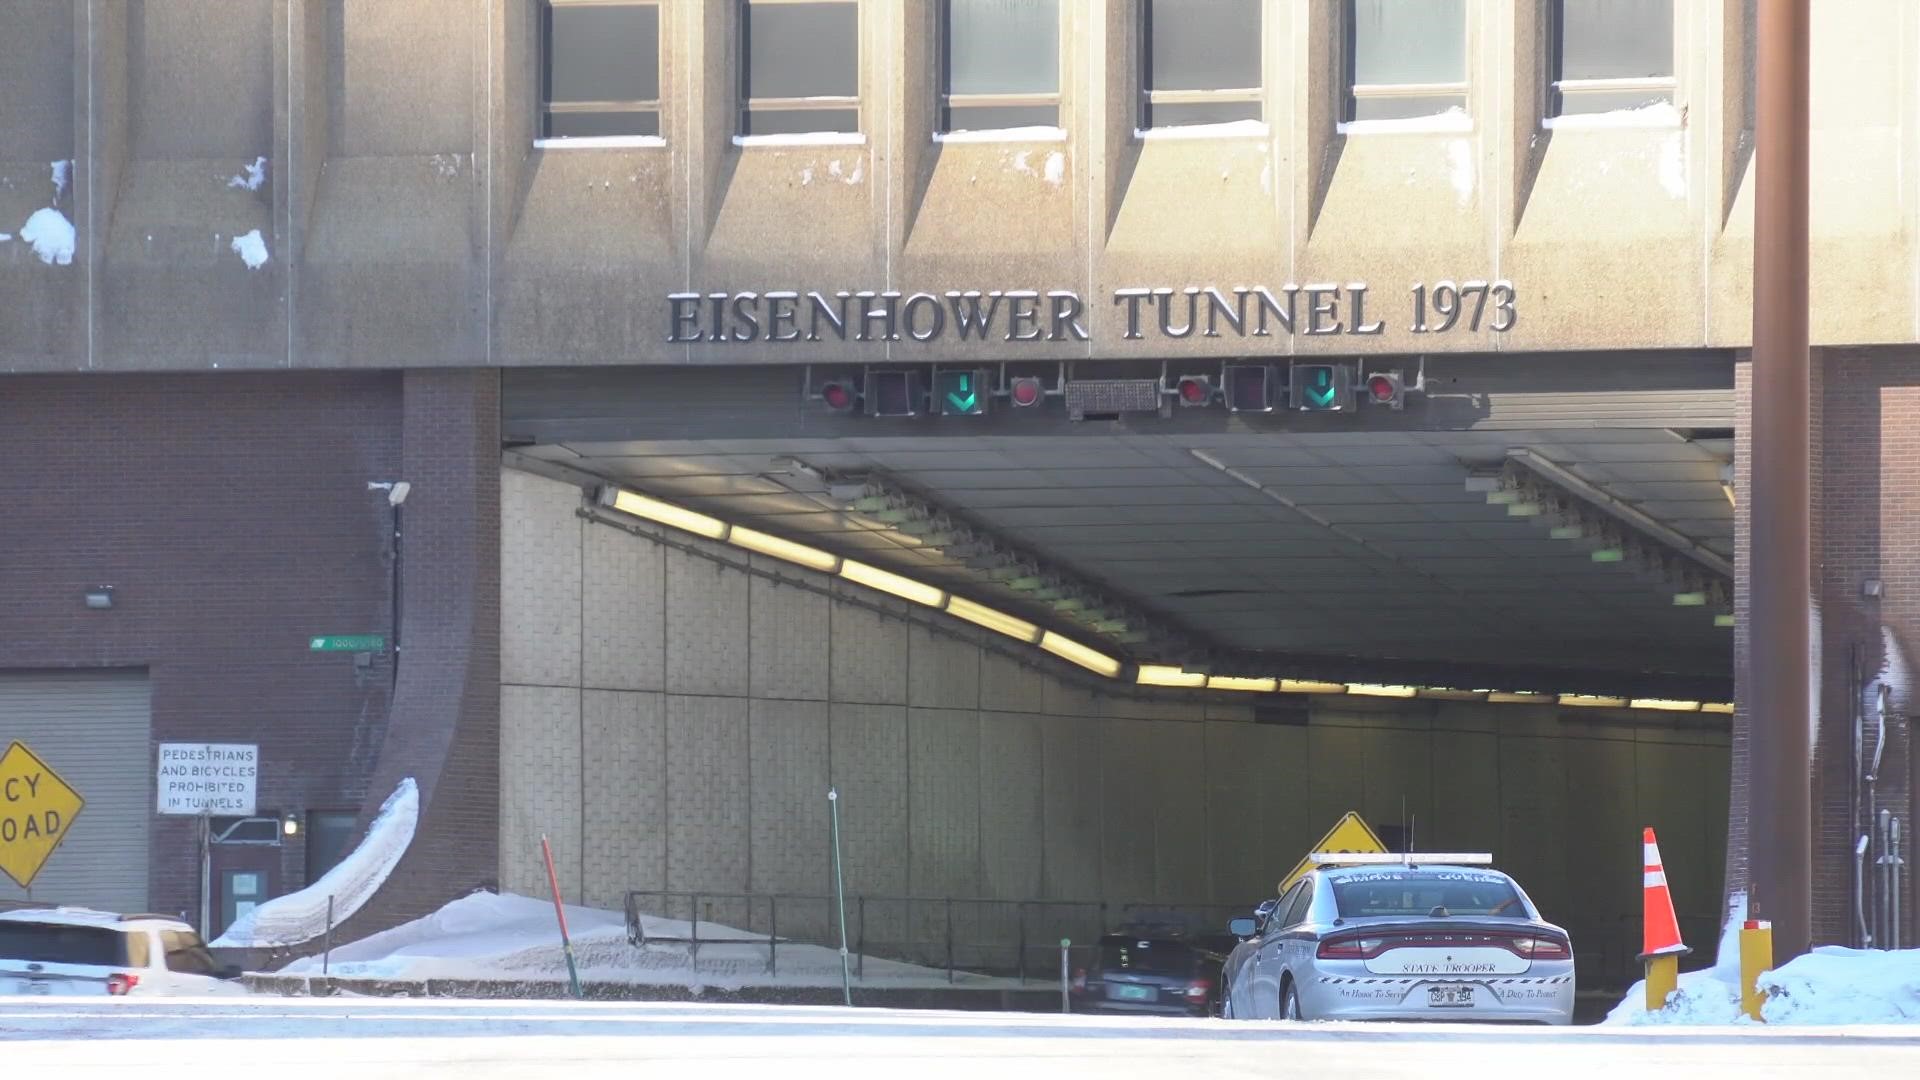 The 1.6-mile tunnel originally opened on March 8, 1973, and has played a major role in interstate commerce and Colorado's tourism industry for decades.